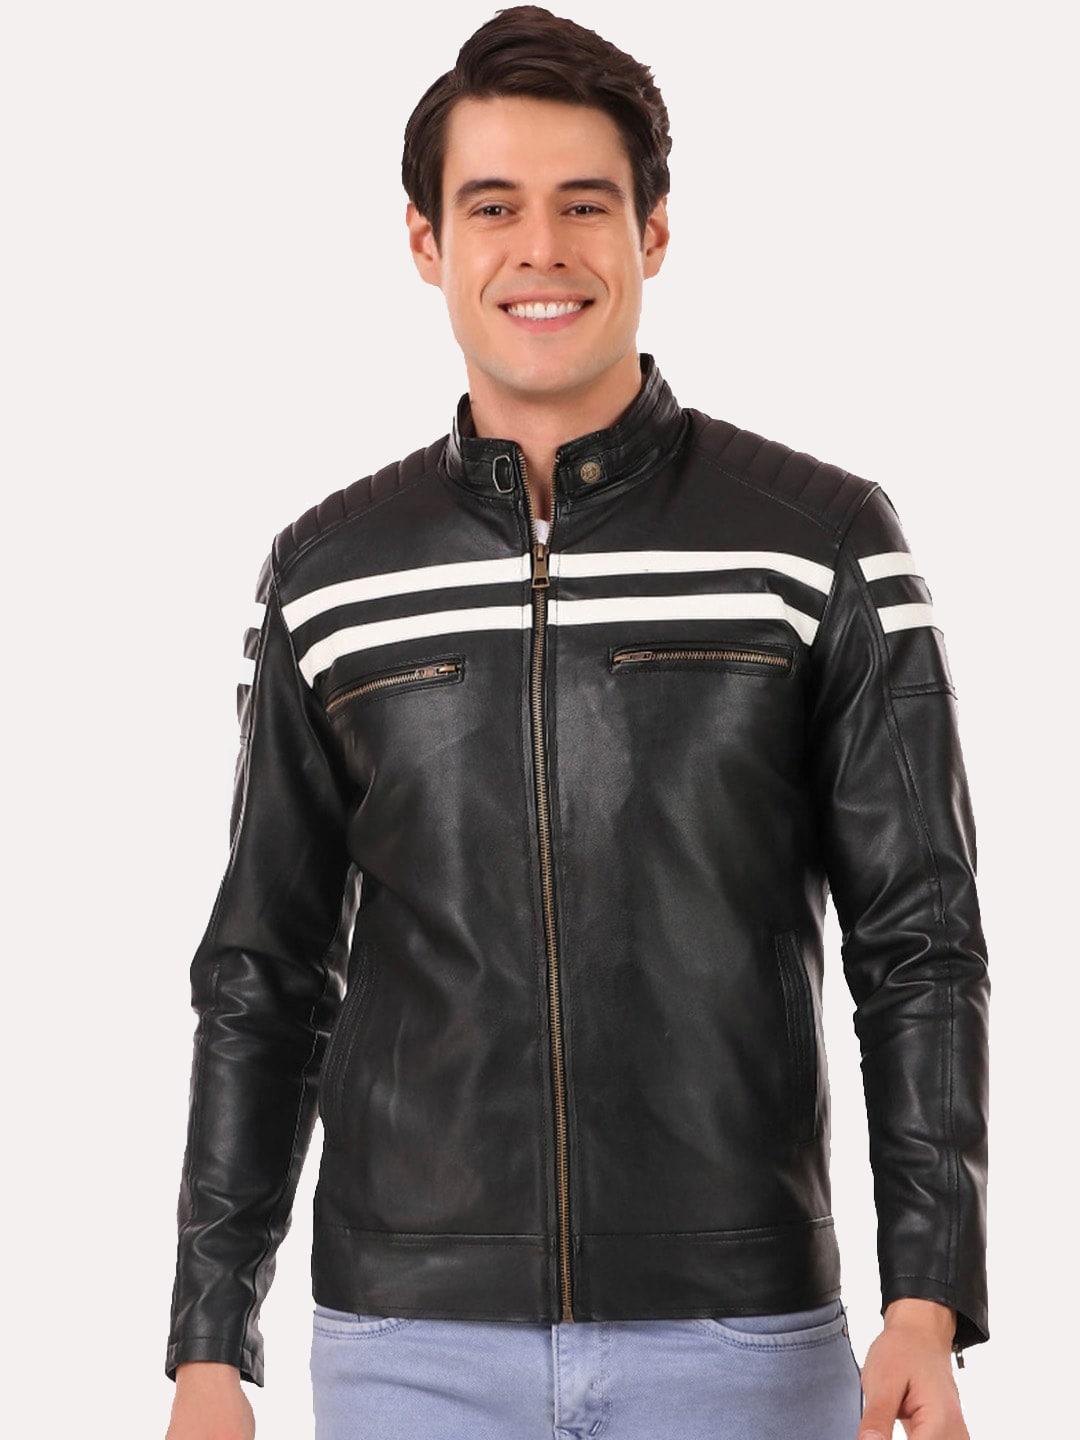 leather-retail-men-black-white-striped-outdoor-biker-jacket-with-patchwork